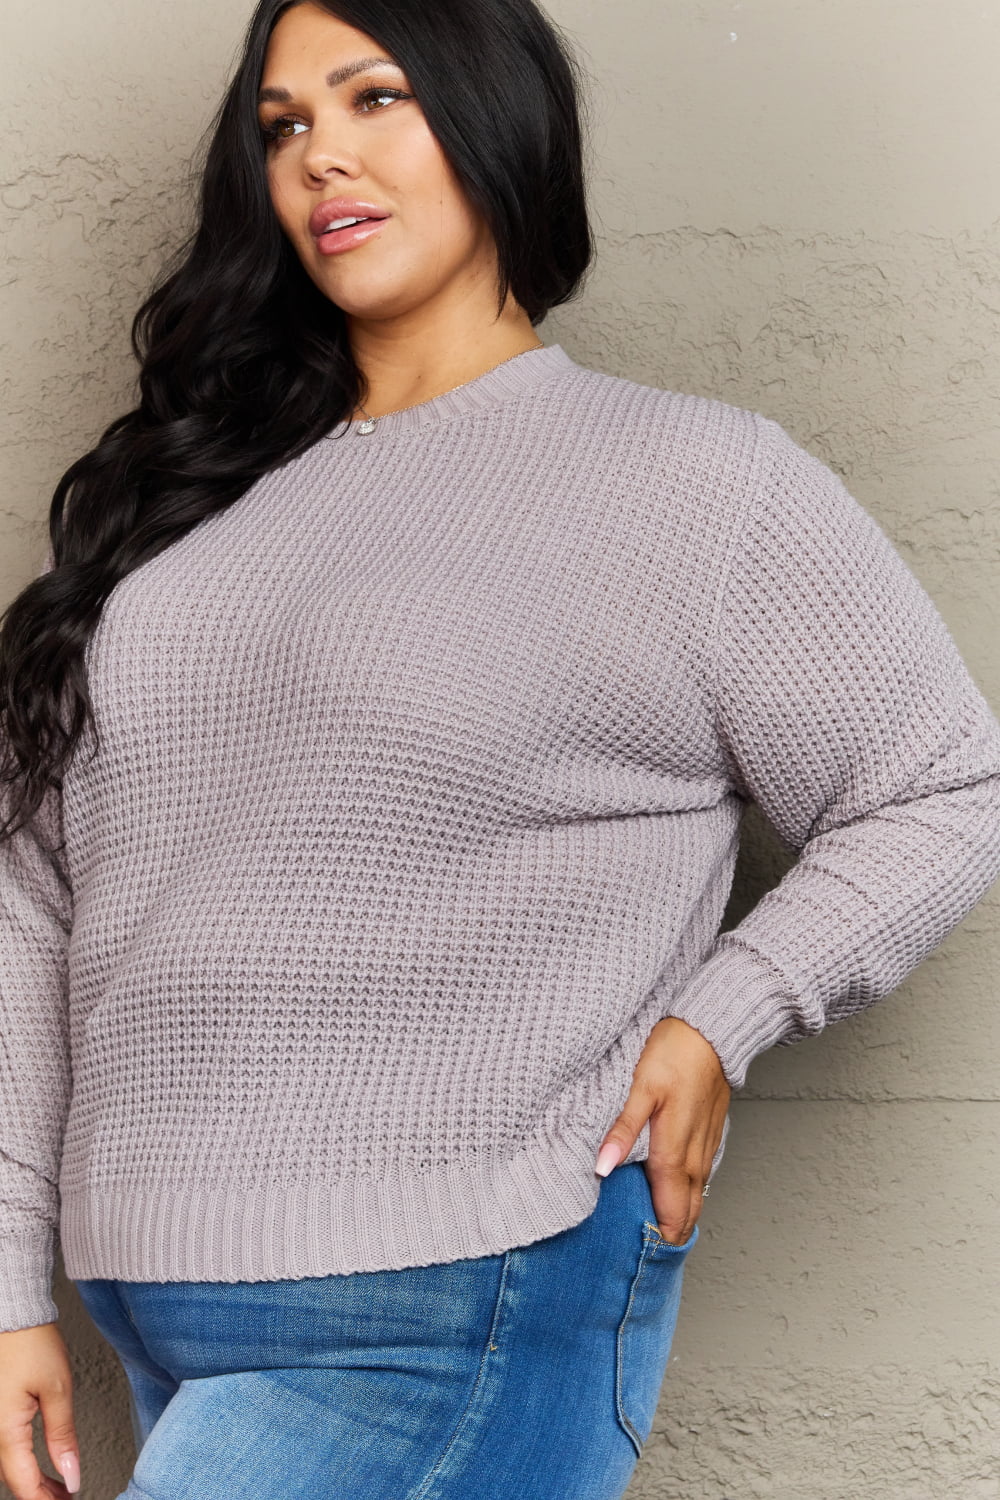 Breezy Days Plus Size High Low Waffle Knit Sweater - Sweaters - Shirts & Tops - 5 - 2024